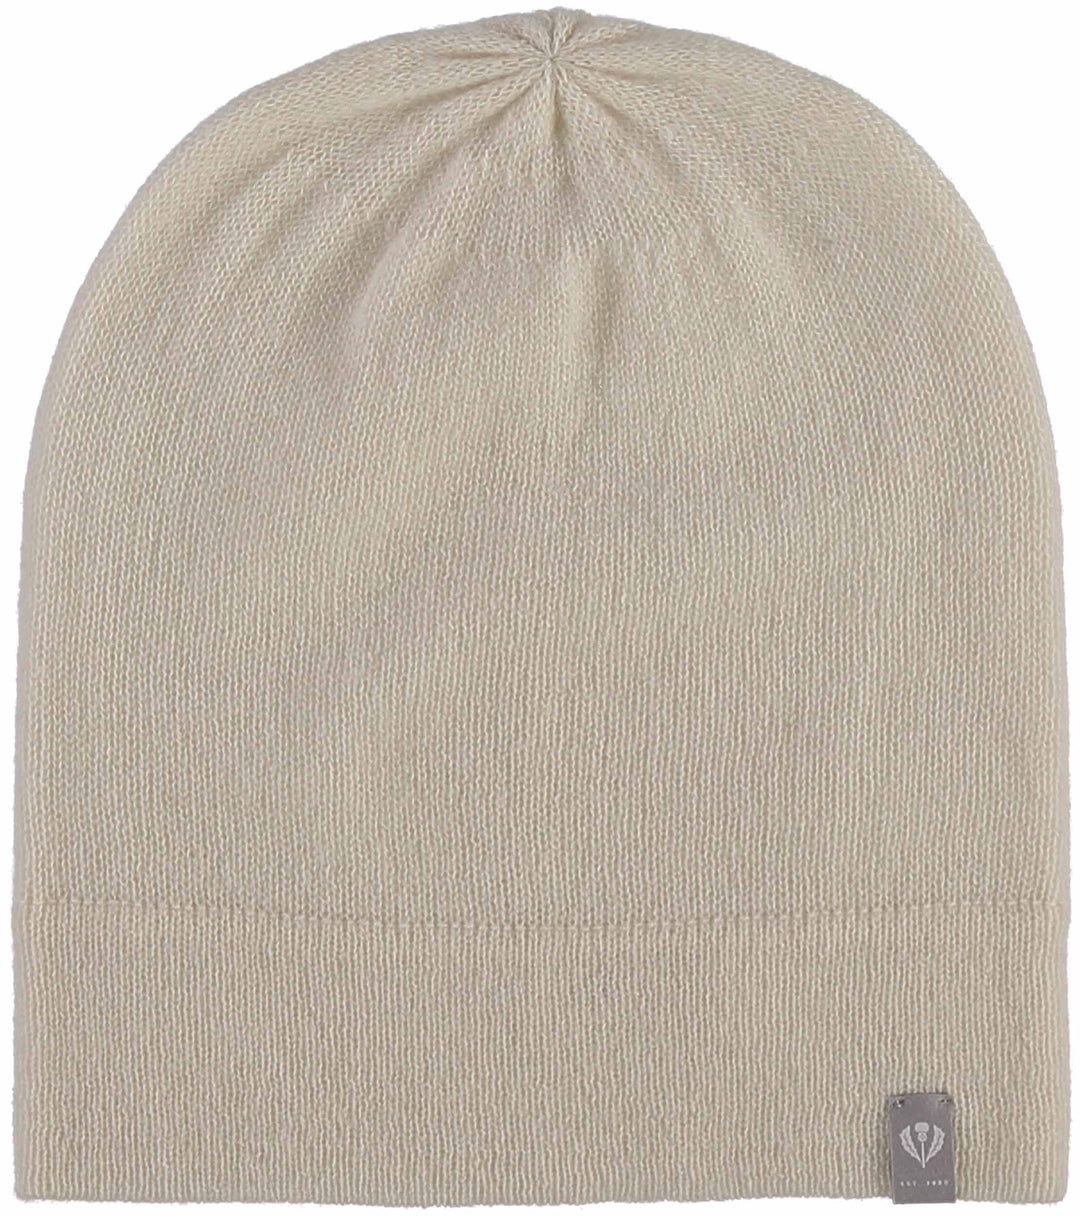 Signature Jersey Knit Cashmere Slouch Hat